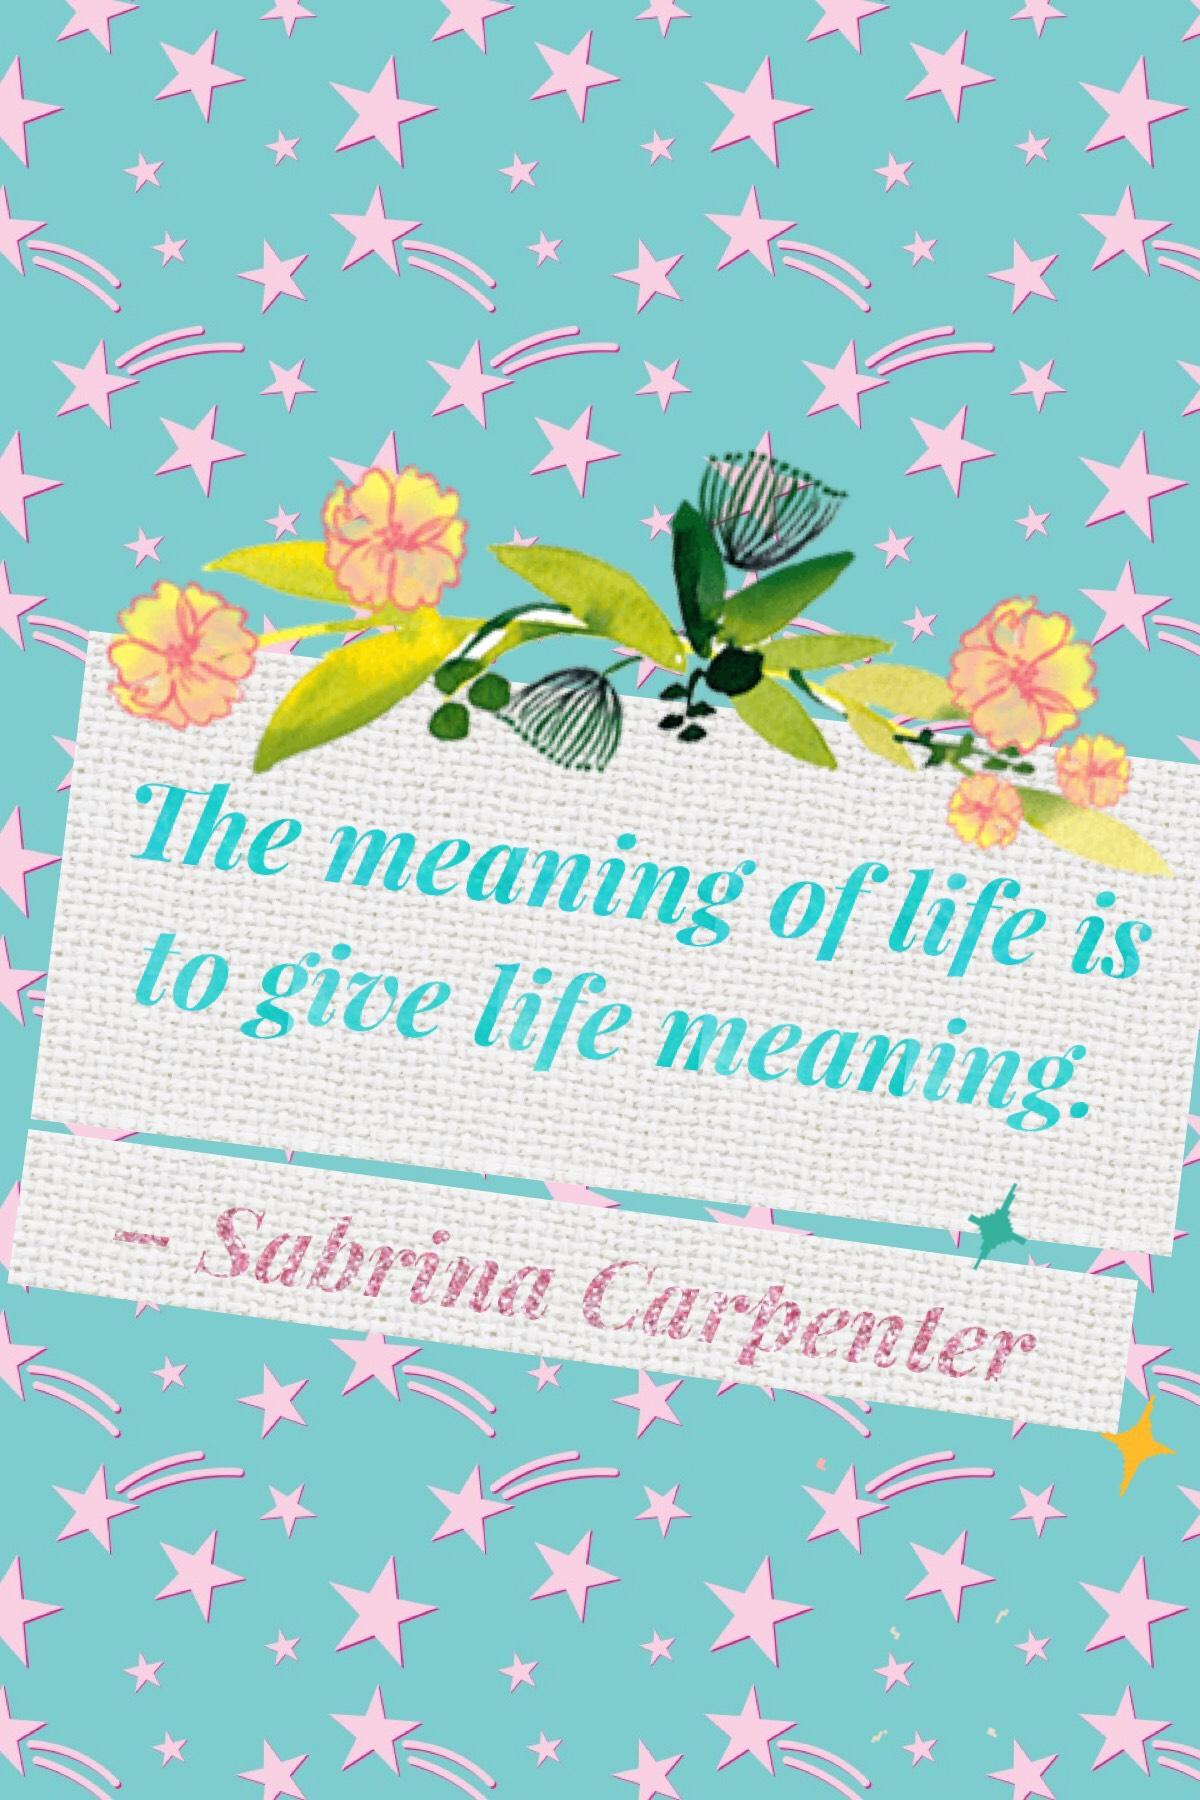 Sabrina.C... a very wise person